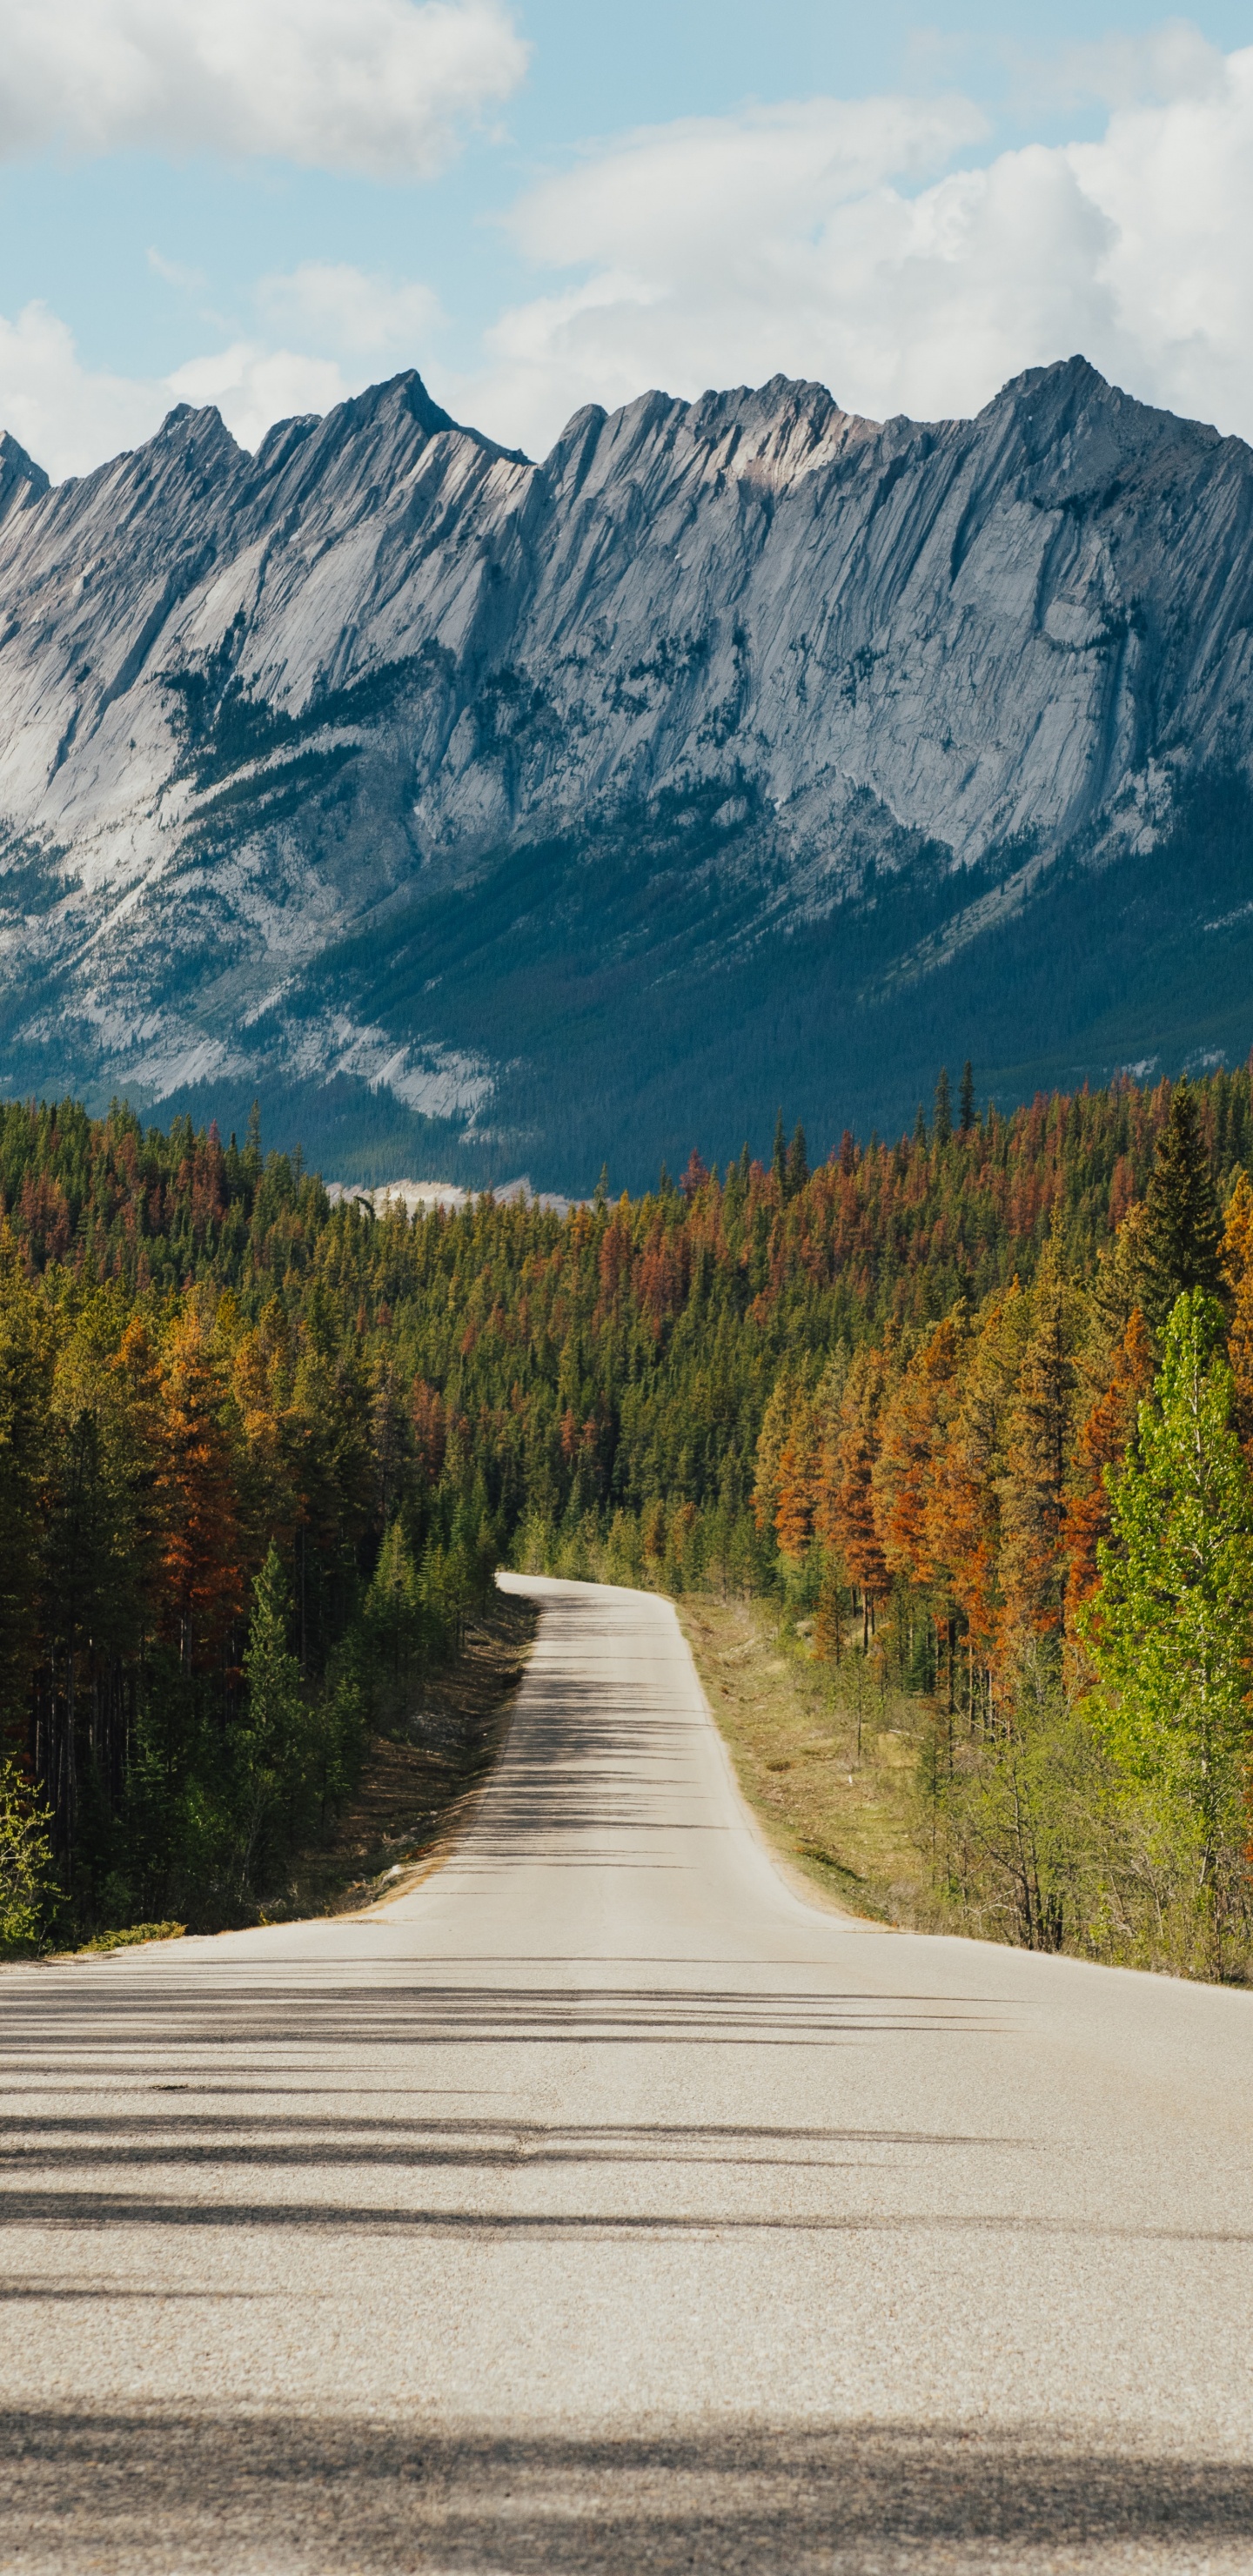 Jasper National Park Of Canada, Road, Forest Highway, Highway, Cloud. Wallpaper in 1440x2960 Resolution